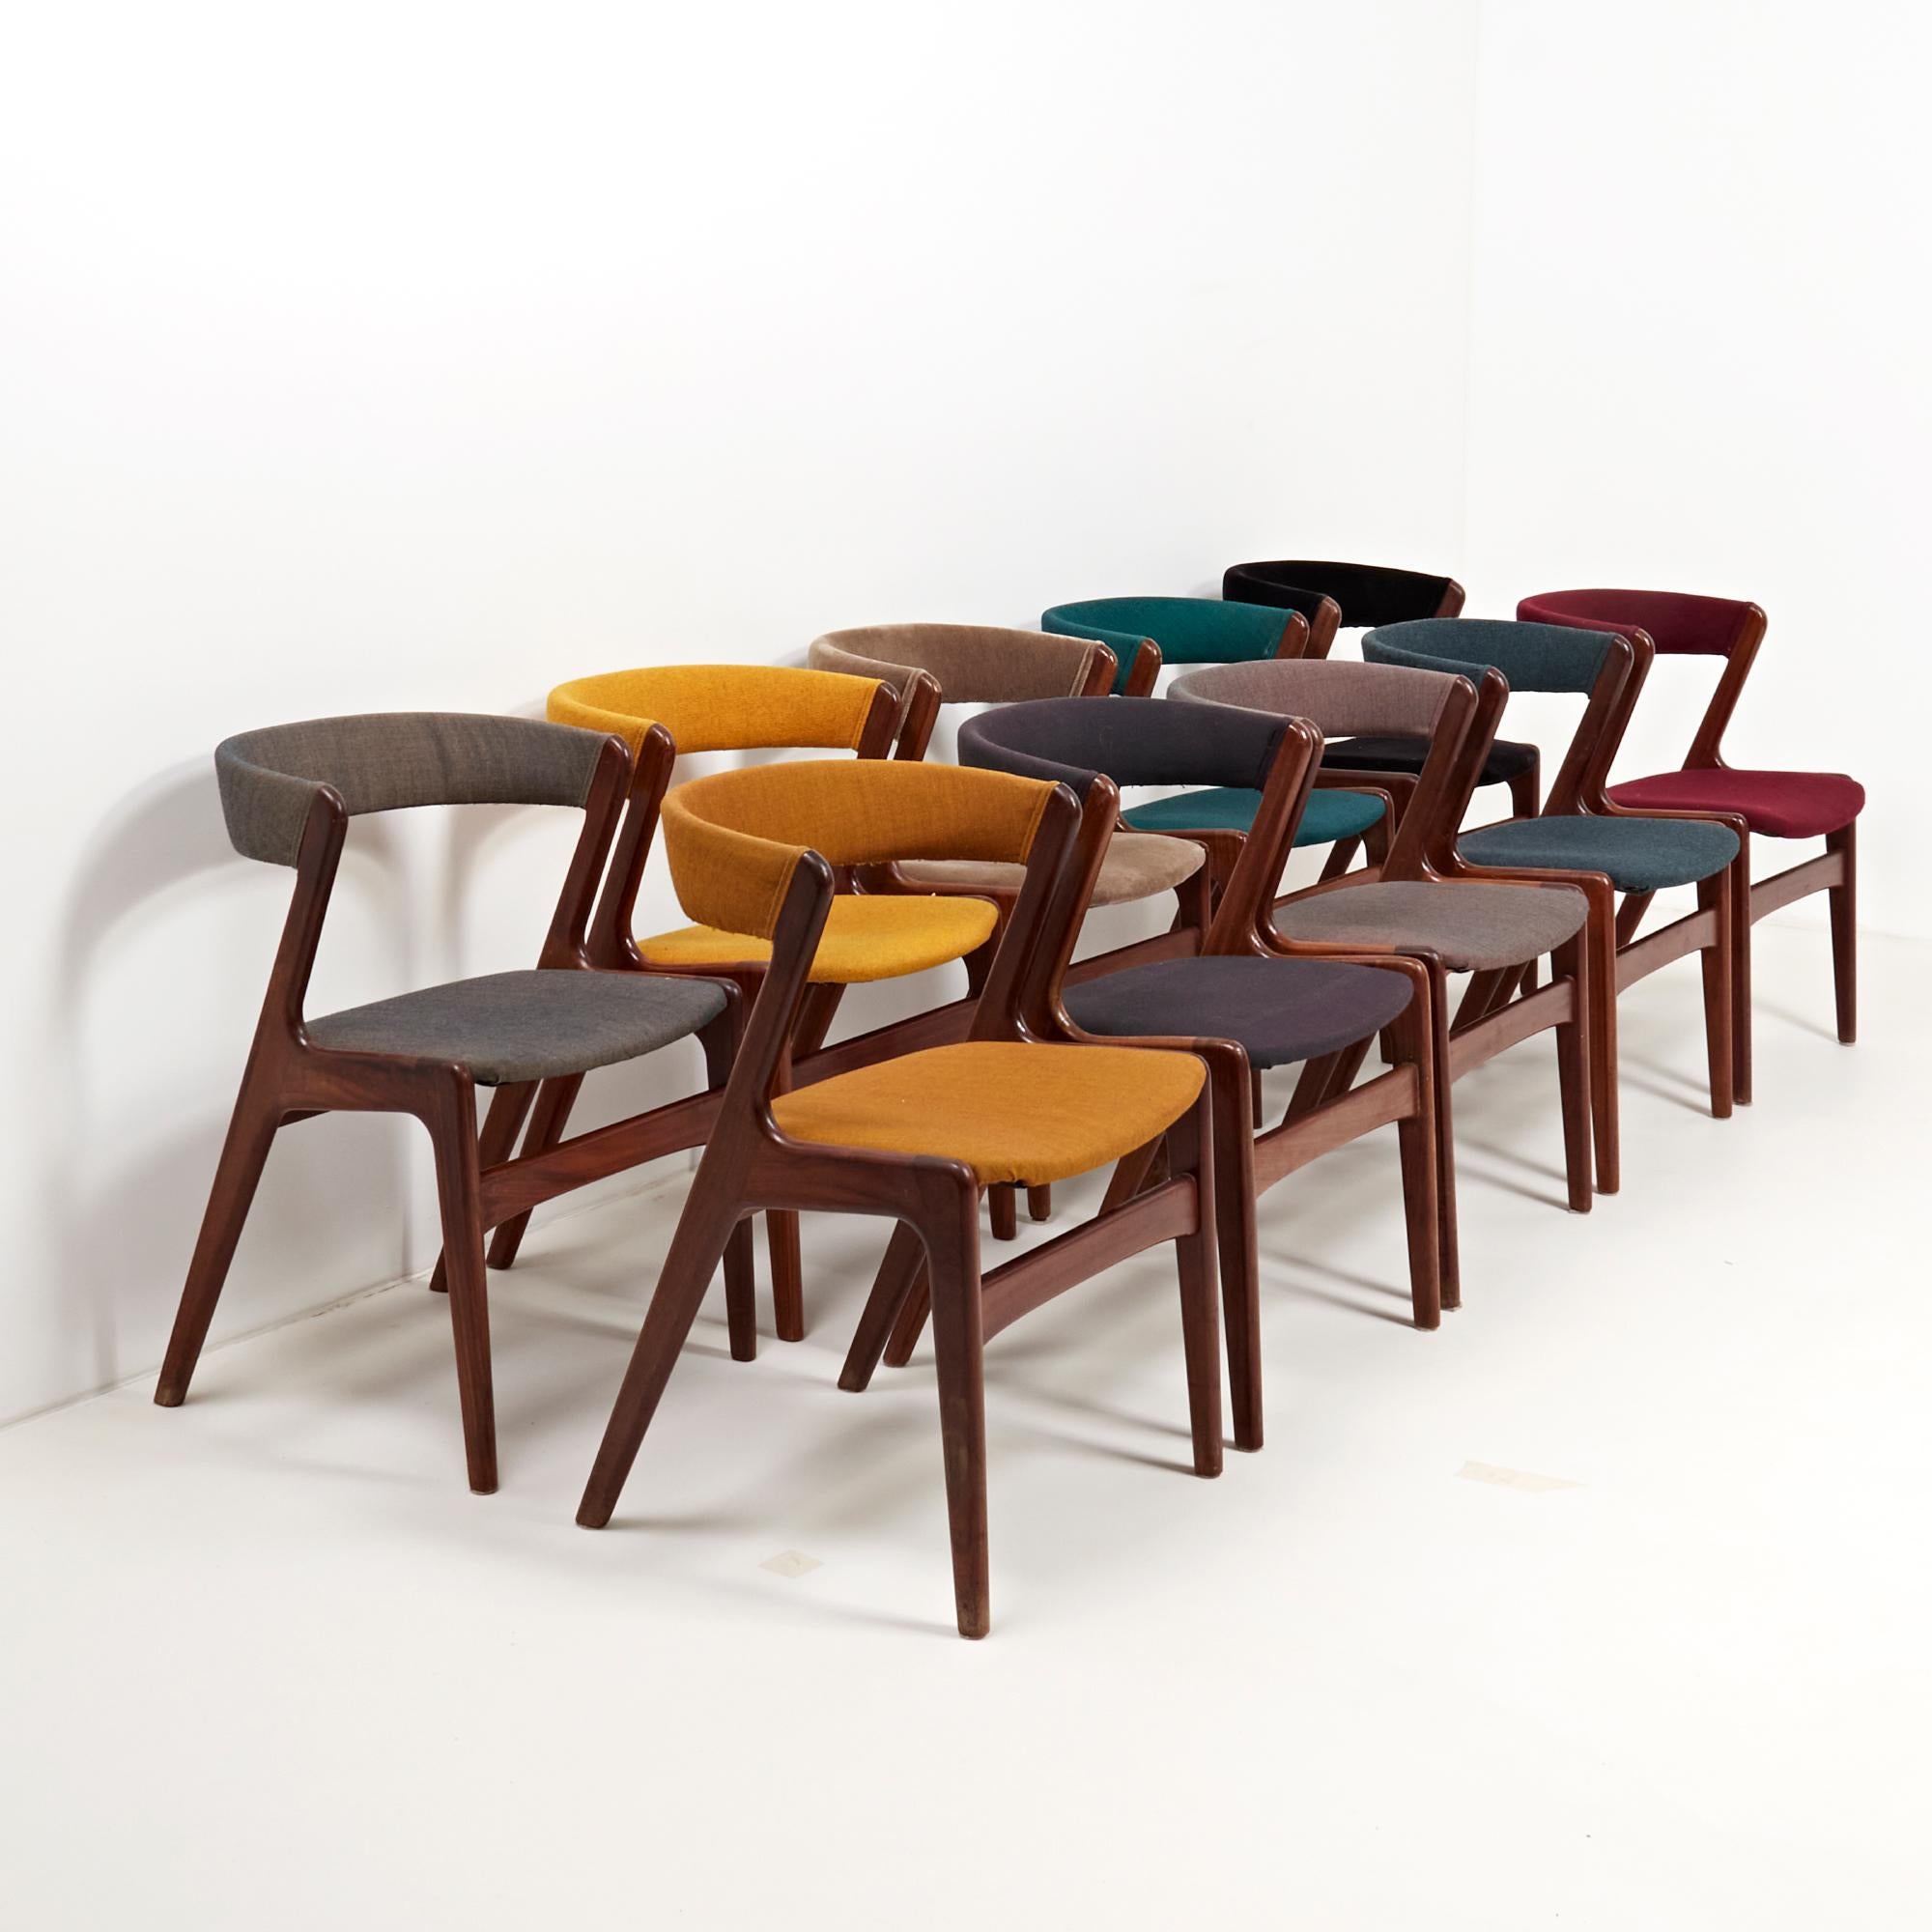 Exemplifying Mid-Century Modern design, this set of ten T21 fire chairs designed by Korup combine sleek curves with angular lines to create an iconic silhouette.

Constructed with solid teak wood bases, the chairs have curved backrests and are